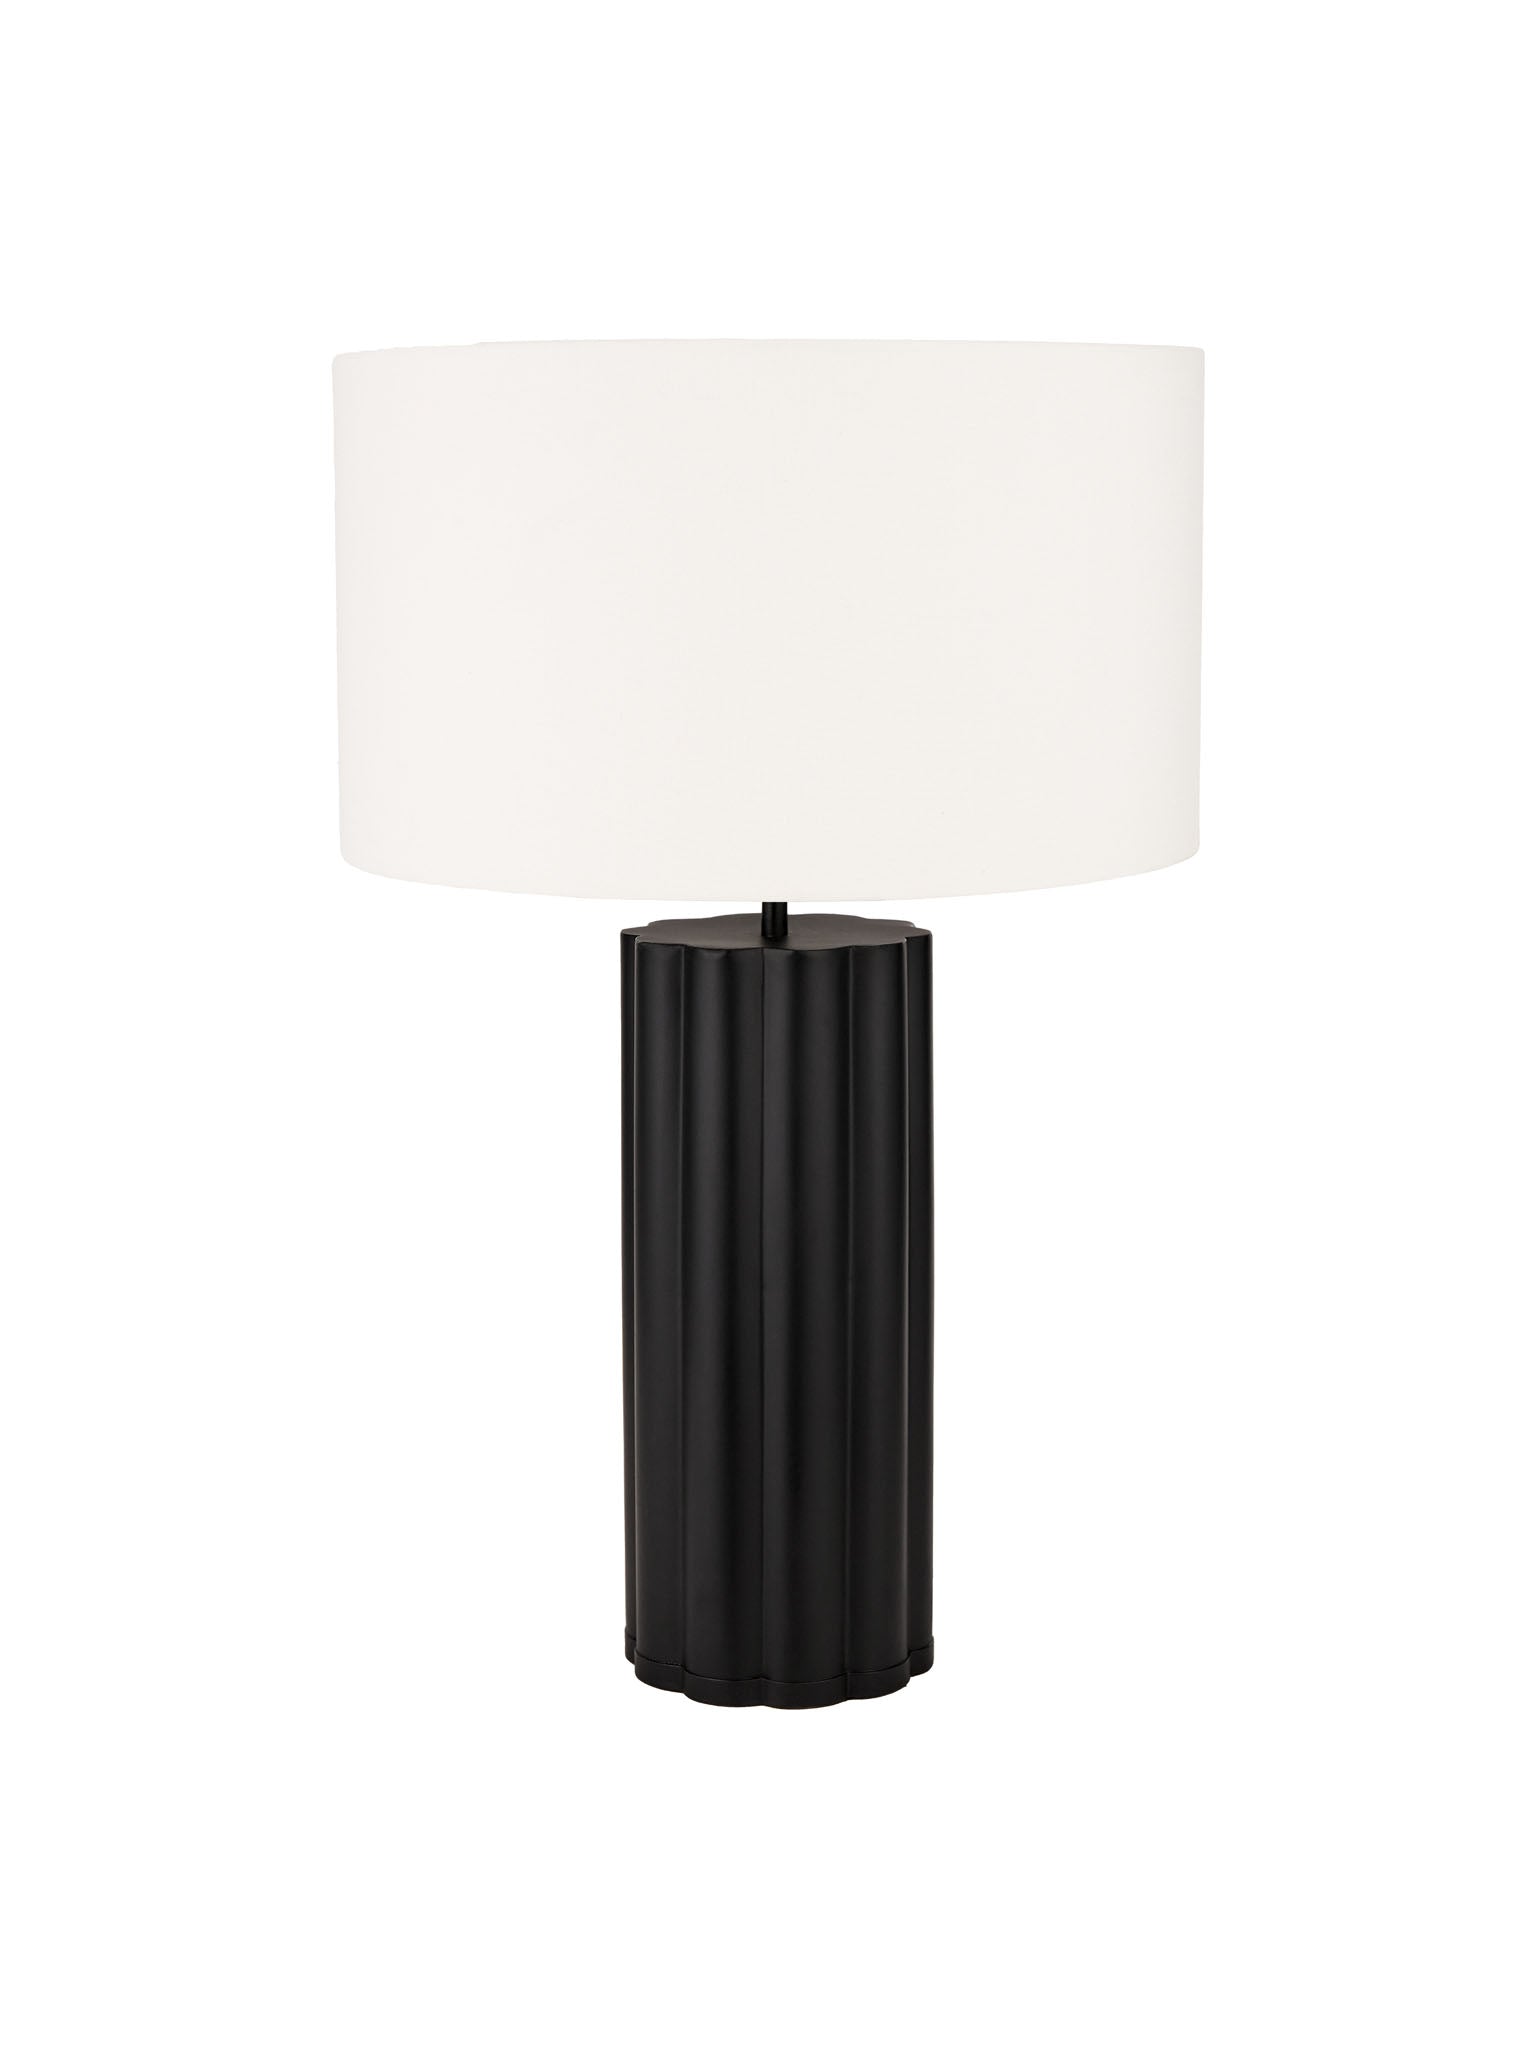 black metal base with a white cylinder shade